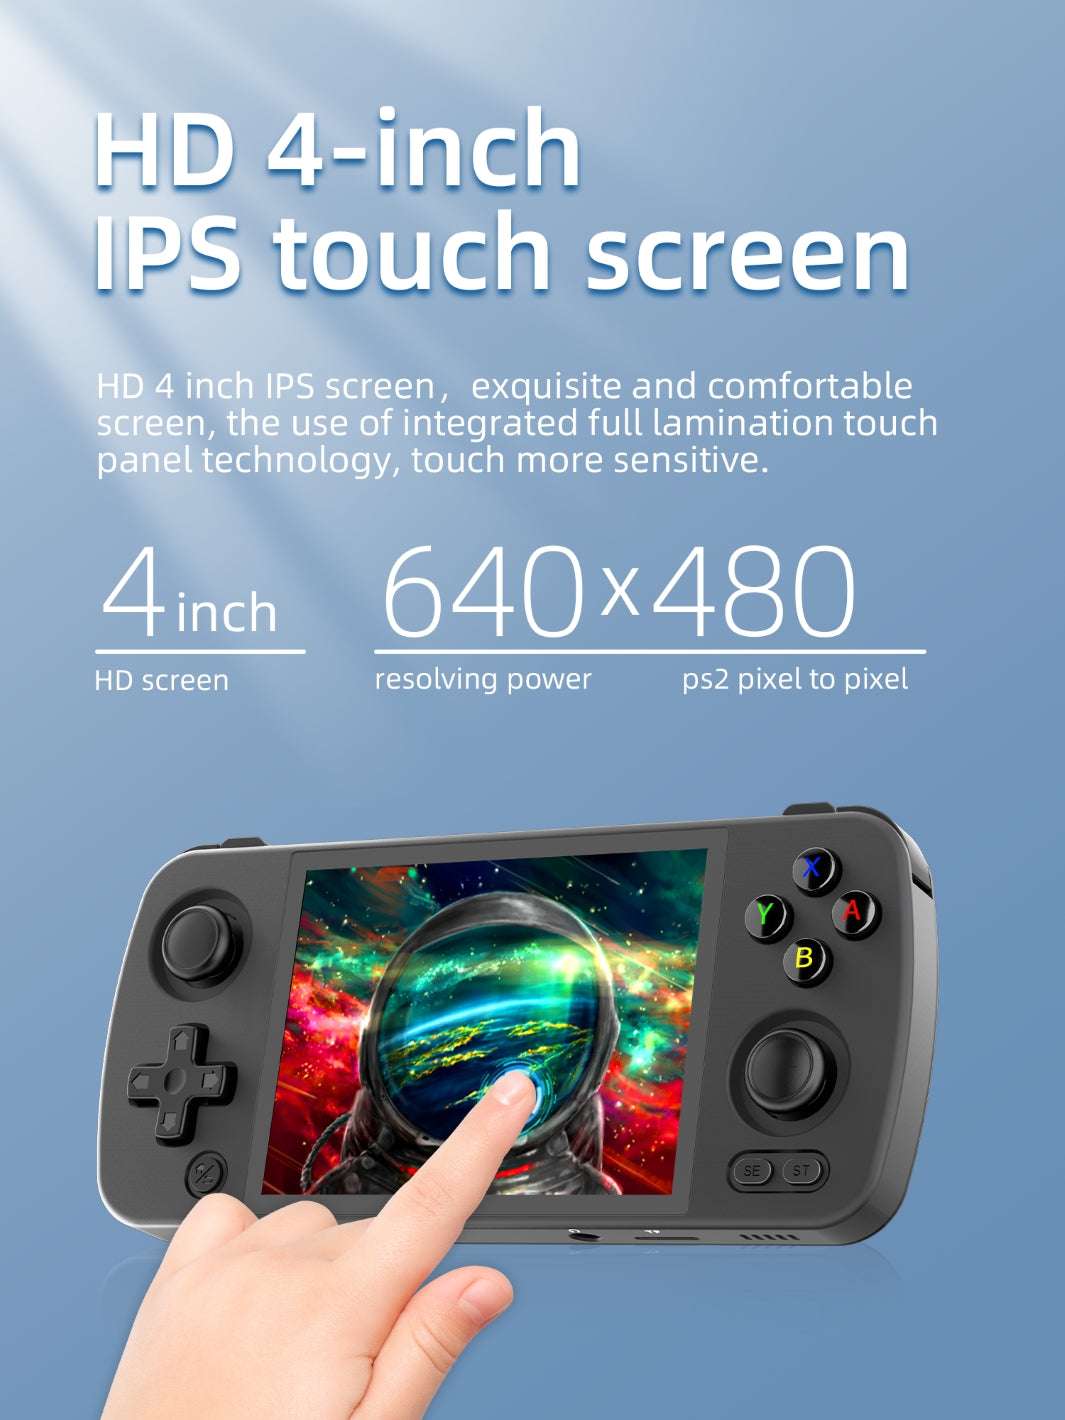 Anbernic RG405M with an amazing HD 4-inch IPS touch screen display with a 640*480 resolution.